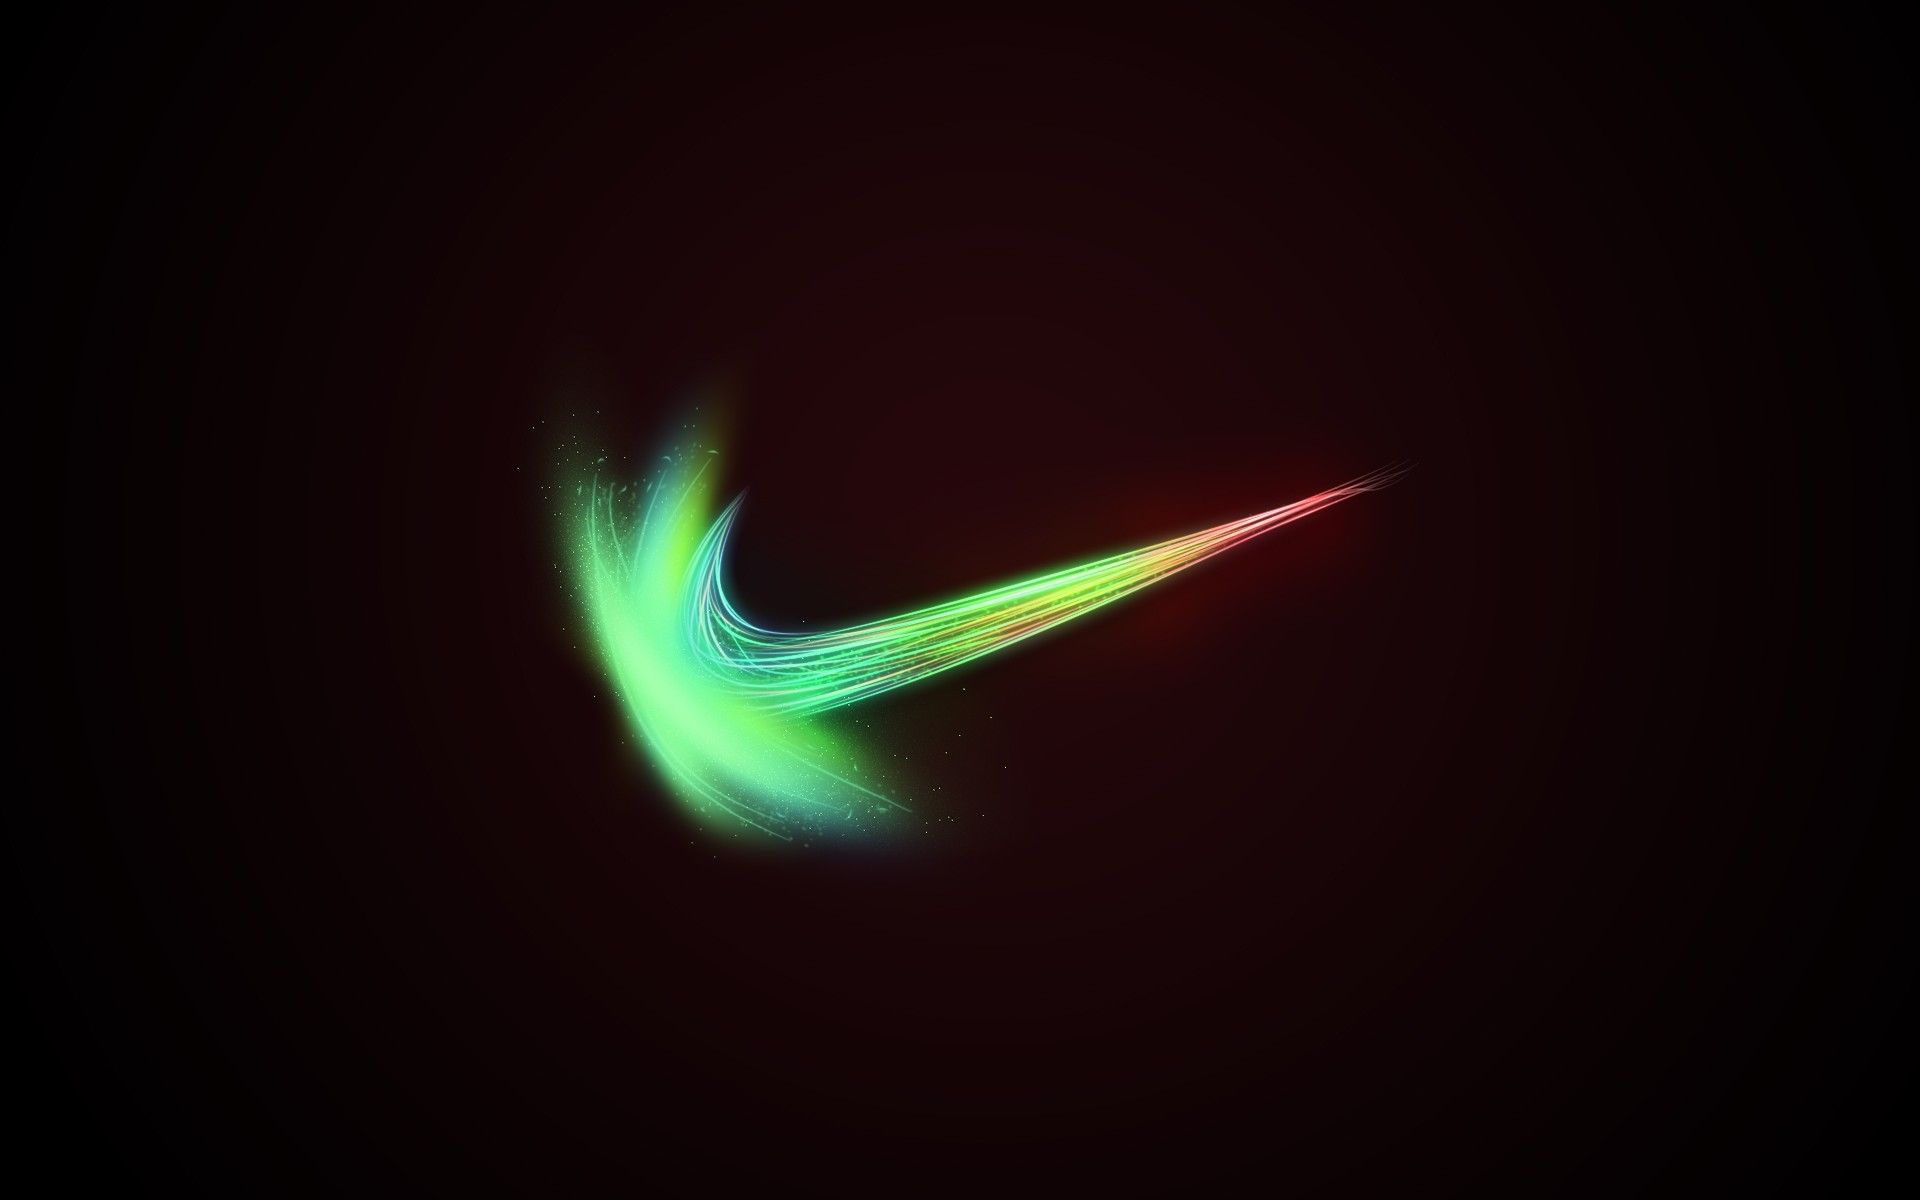 Pink And White Nike Wallpapers